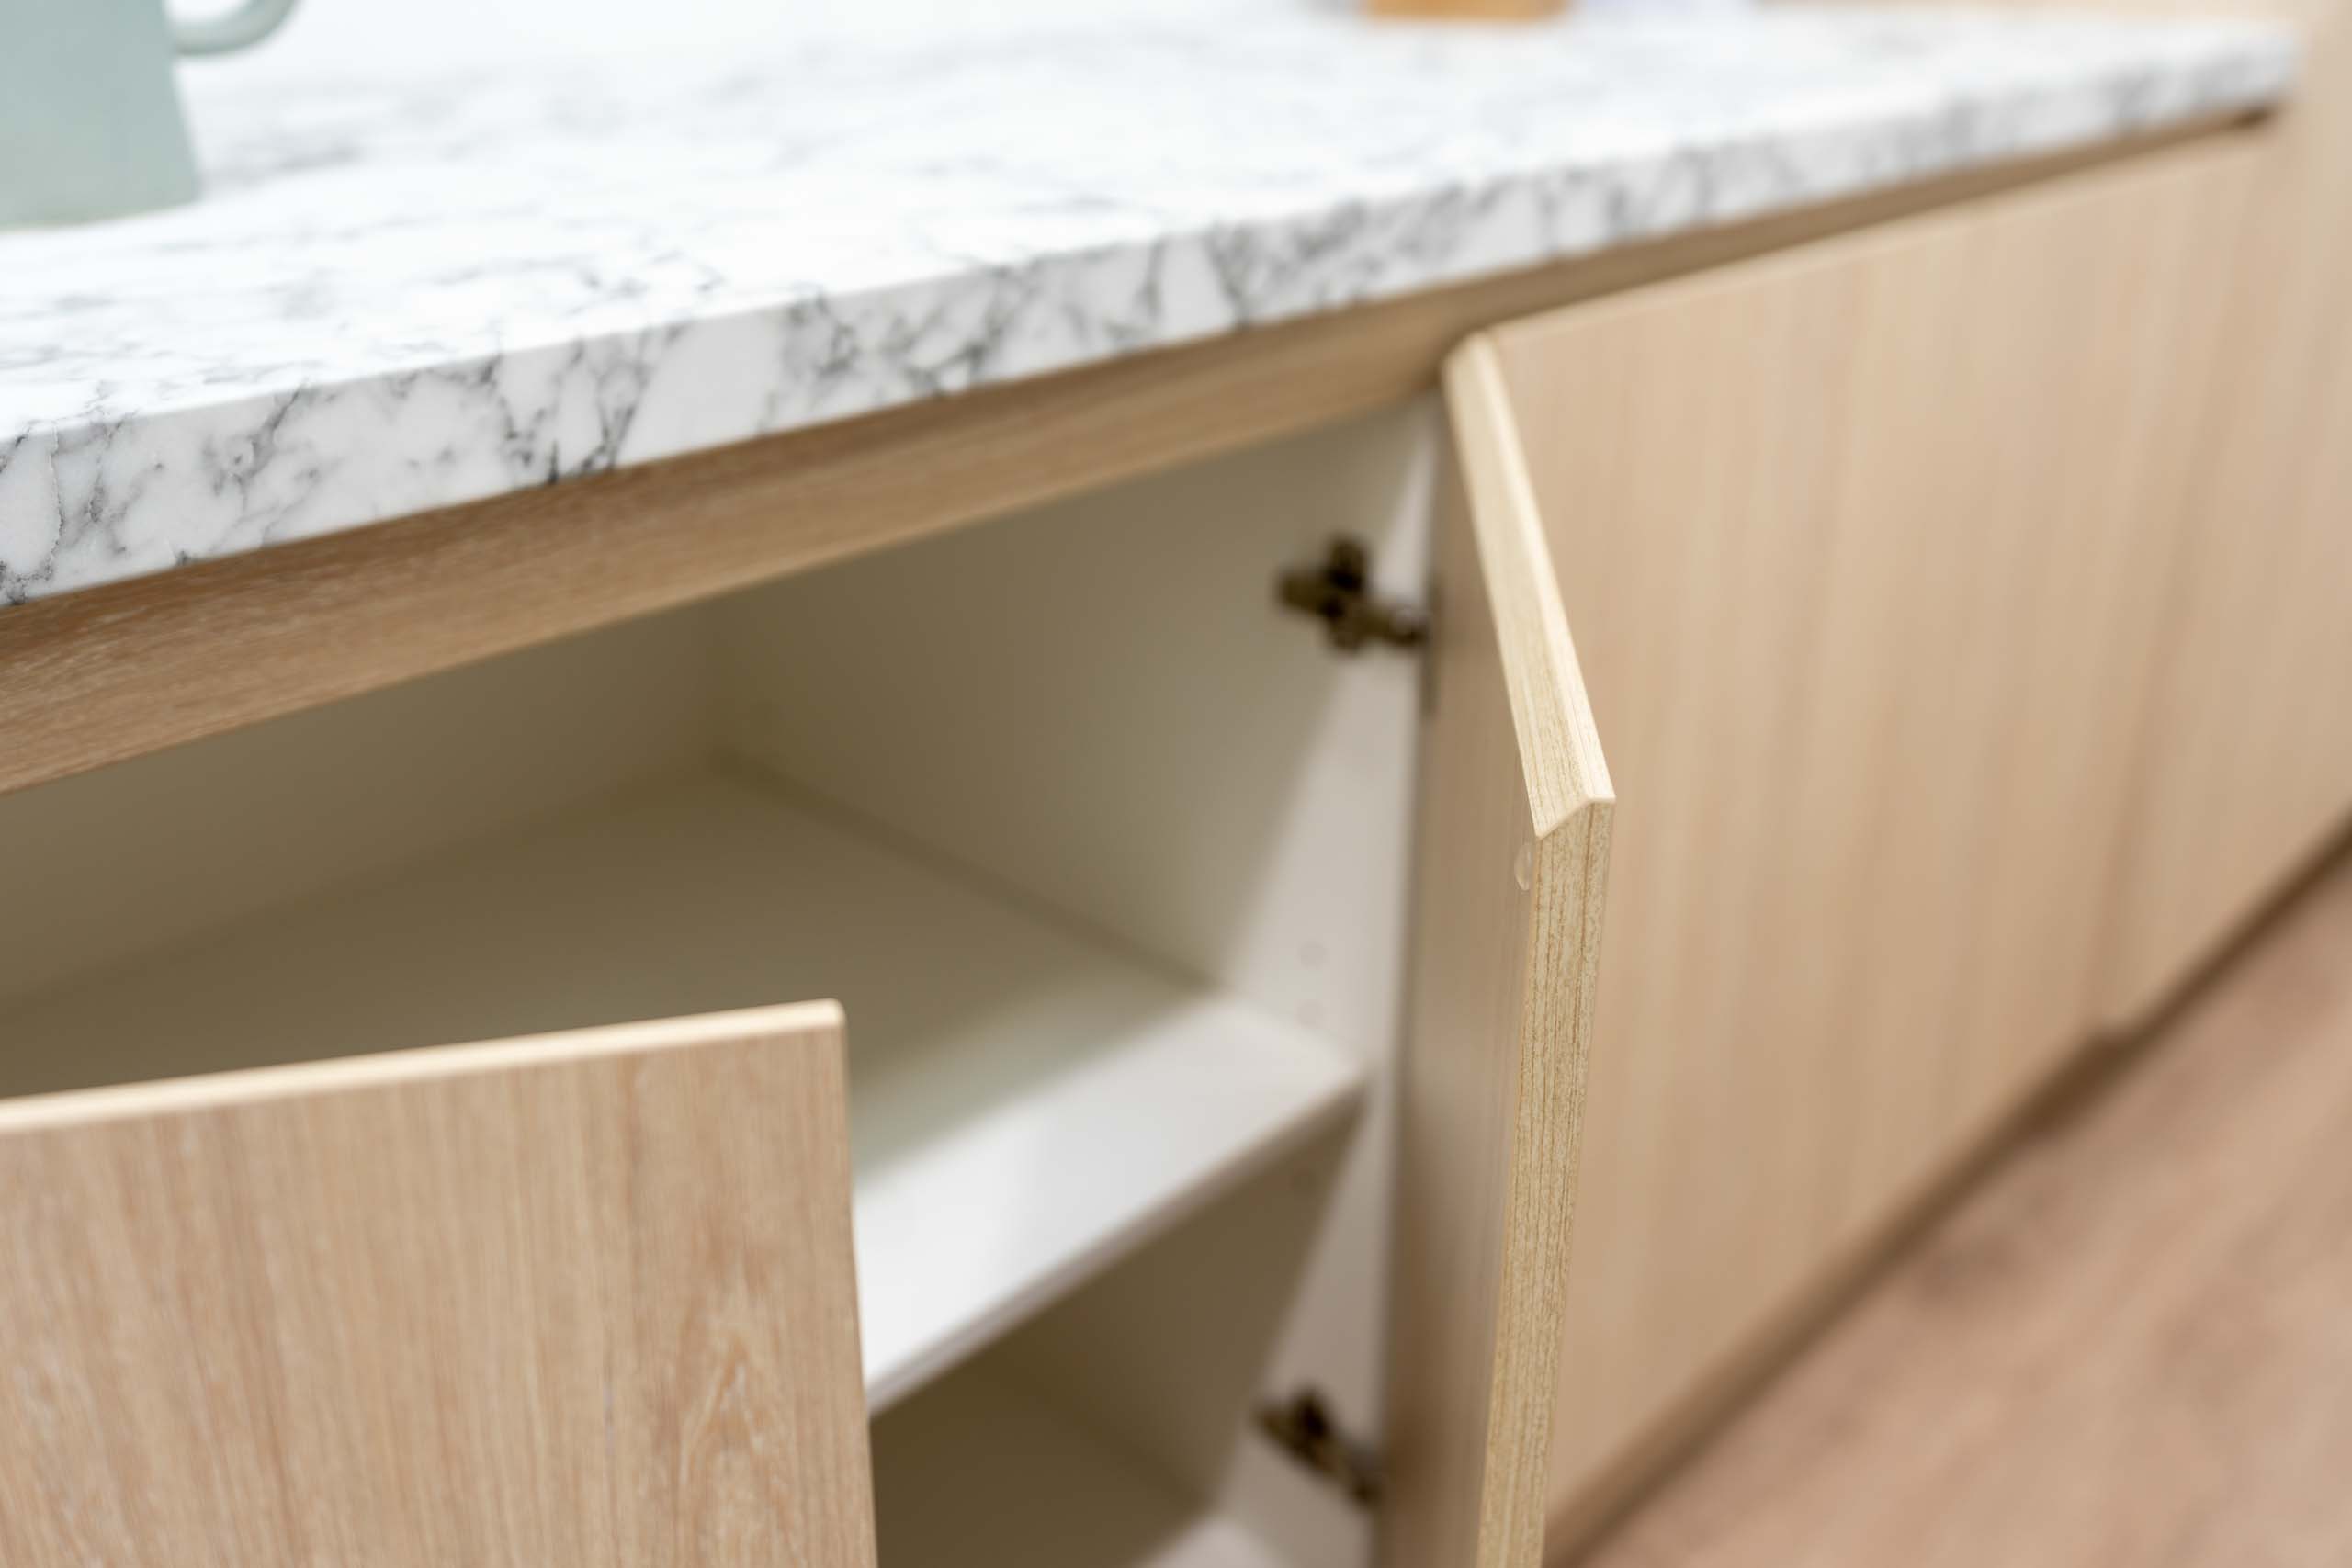 Image showing K-handle finger grip cabinet handle solution, with light timber grain cabinetry and marble look laminate benchtop.